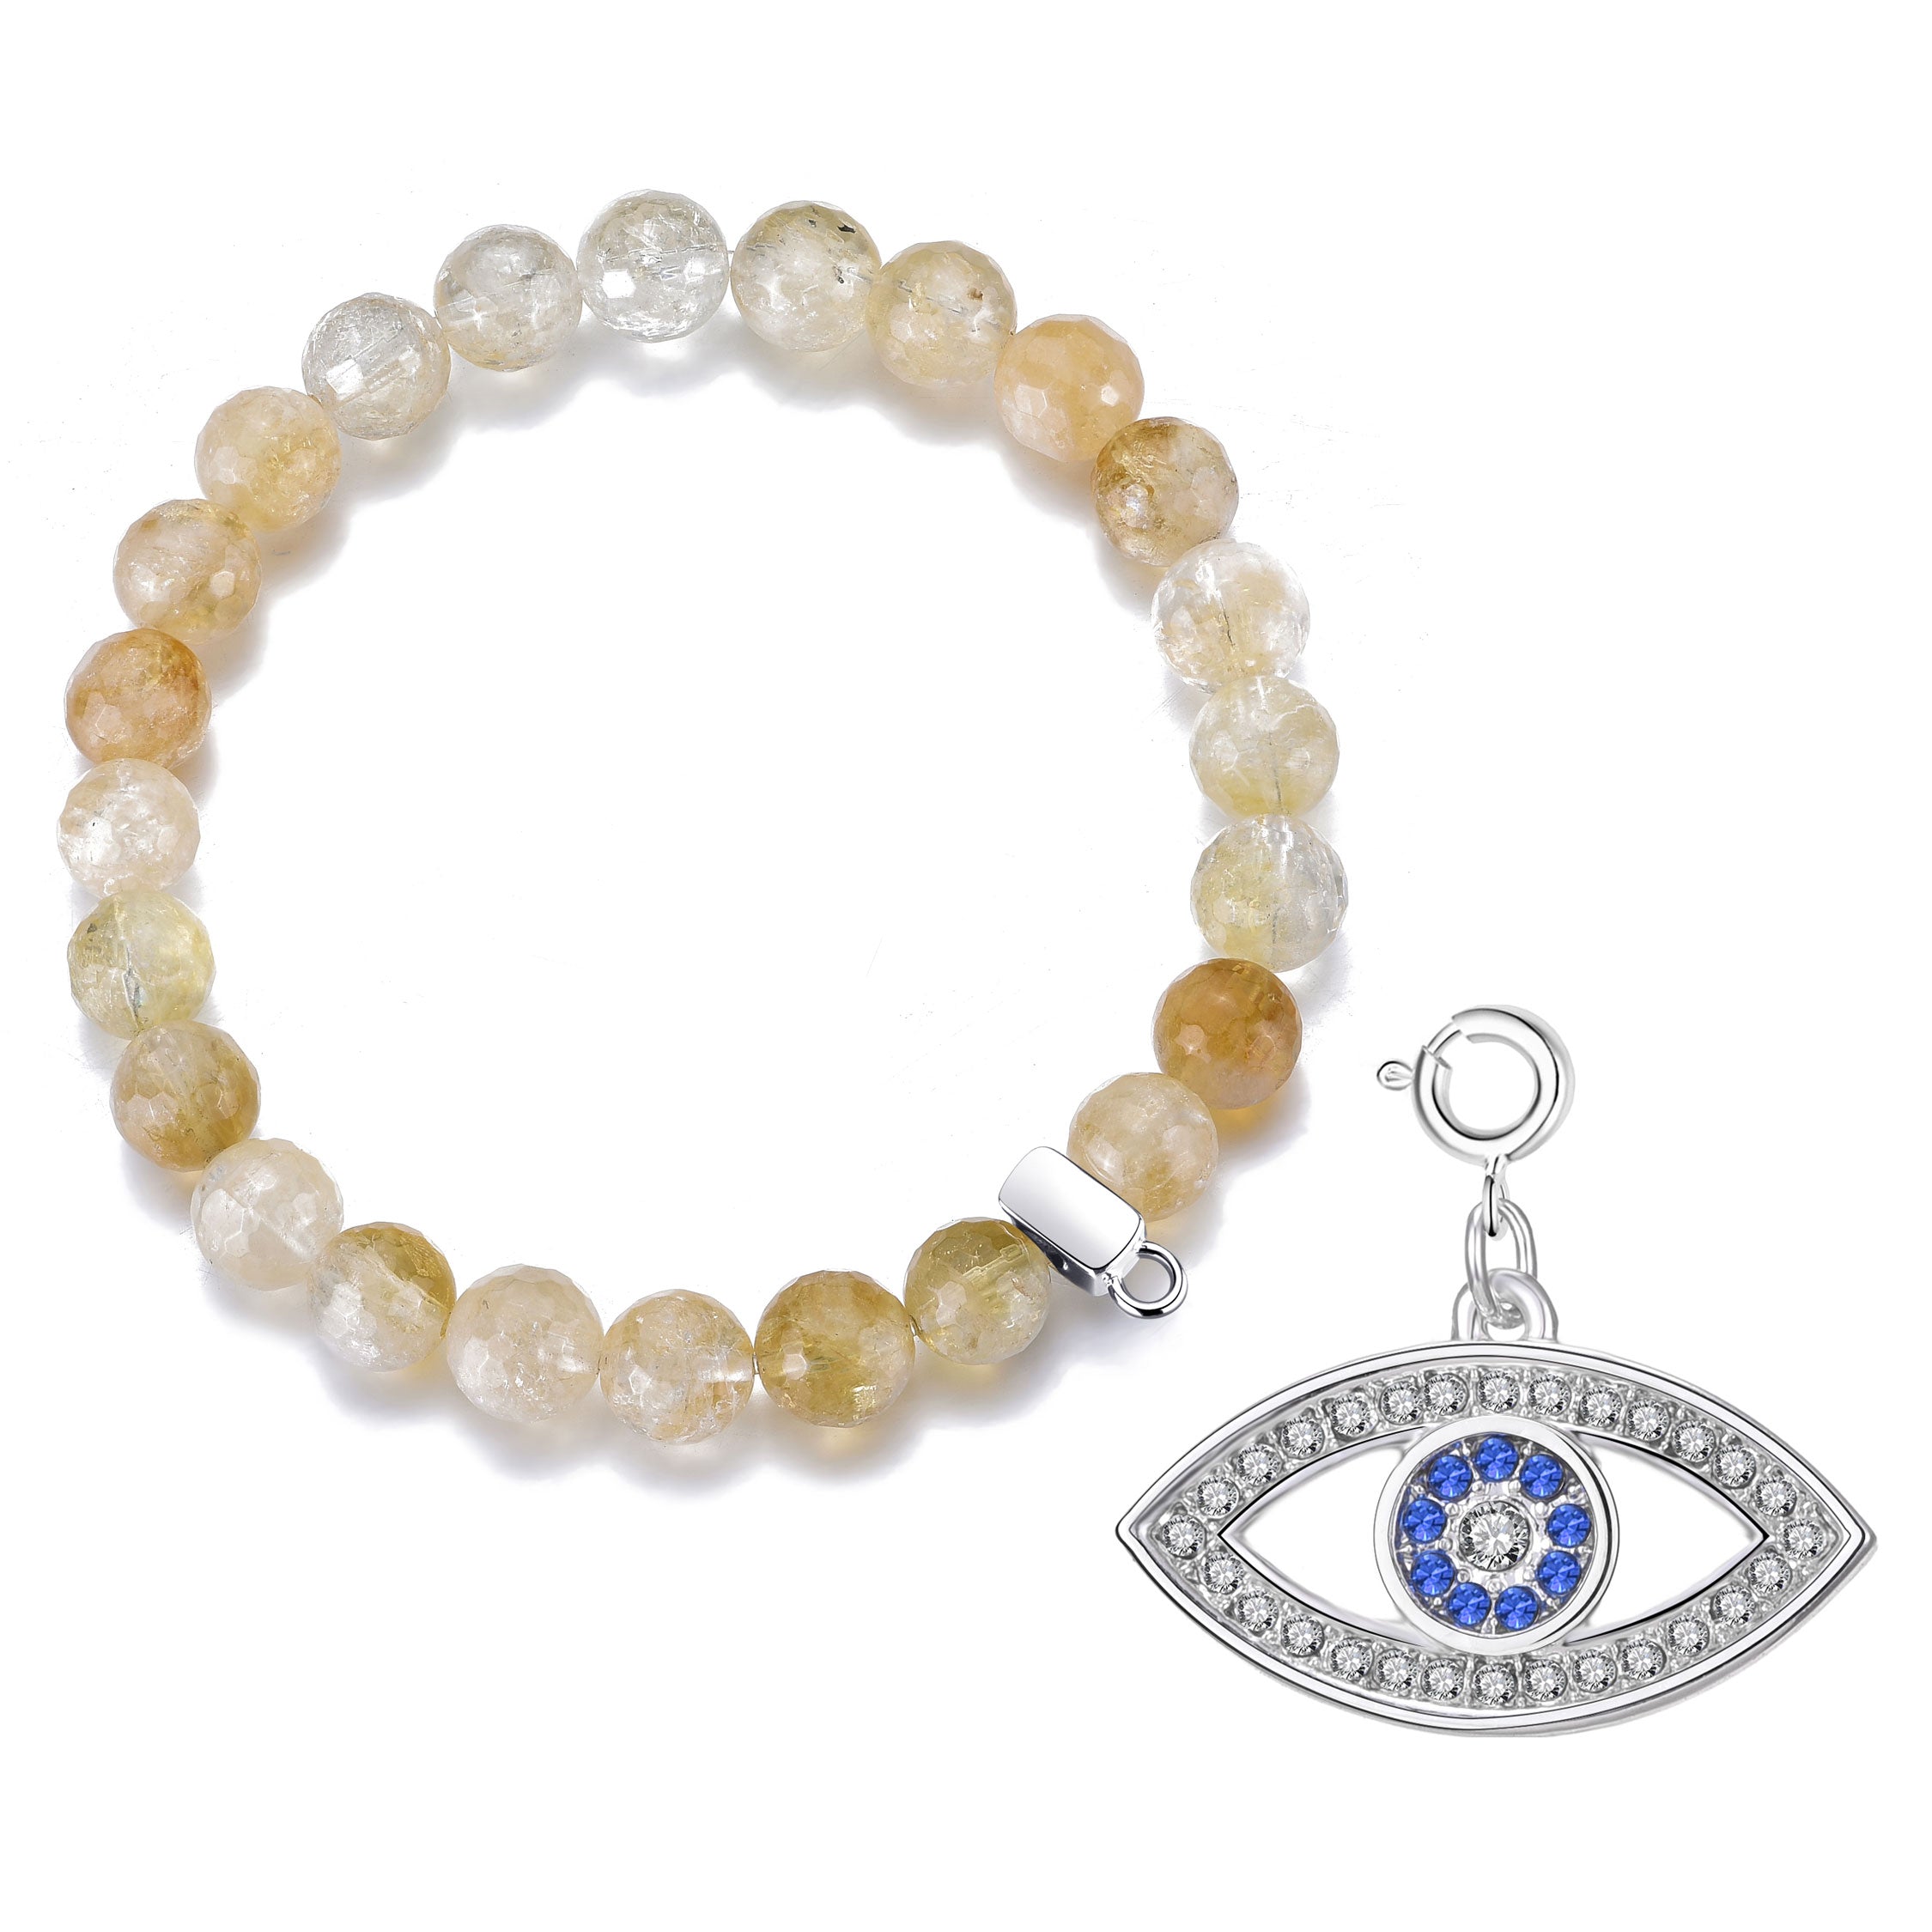 Faceted Yellow Quartz Gemstone Stretch Bracelet with Charm Created with Zircondia® Crystals